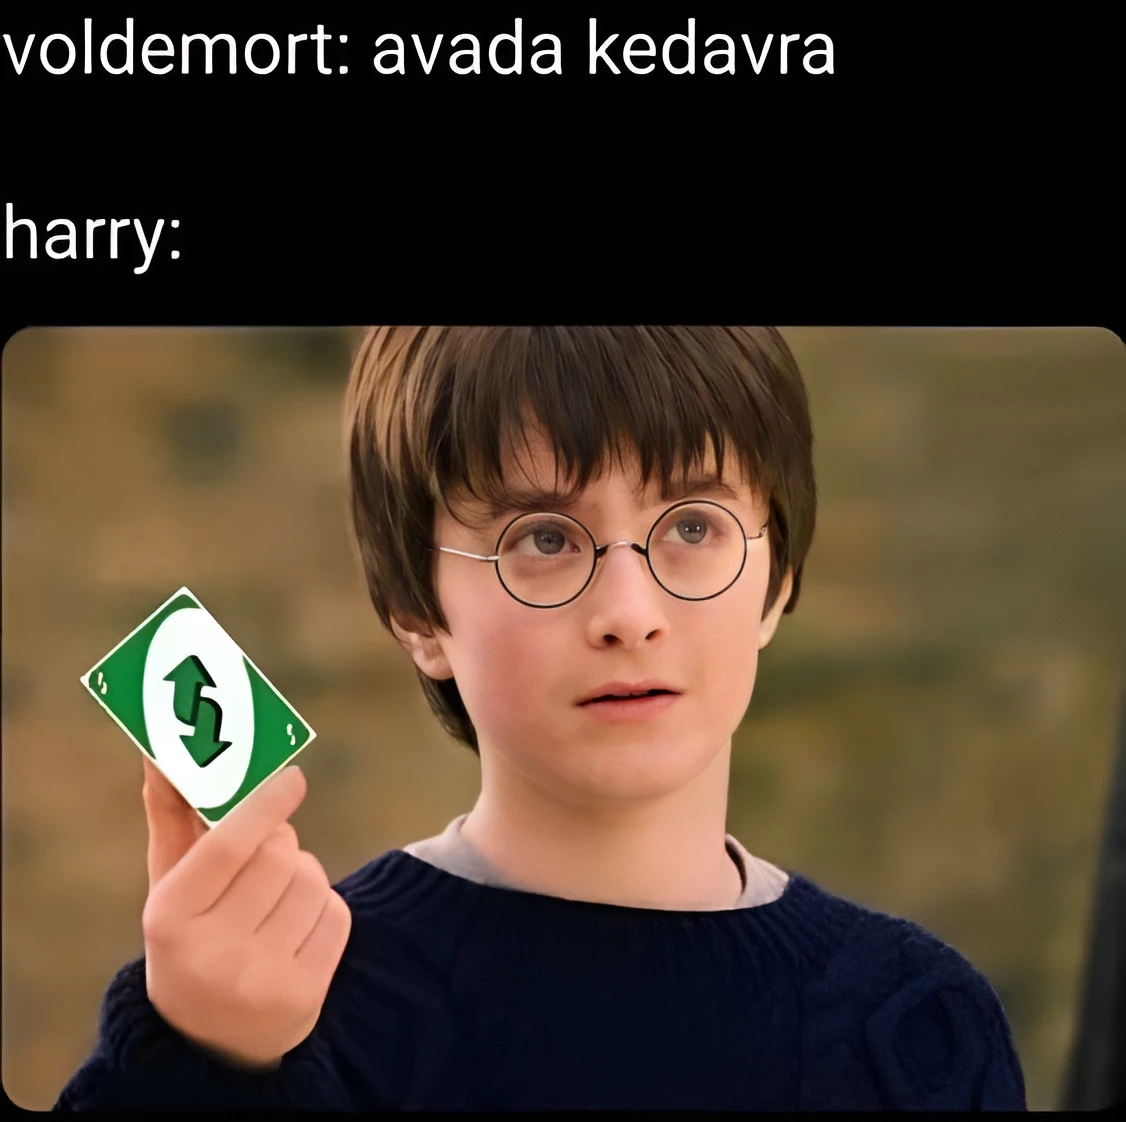 Harry Potter And The Deathly Hallows Part 2 In A Nutshell